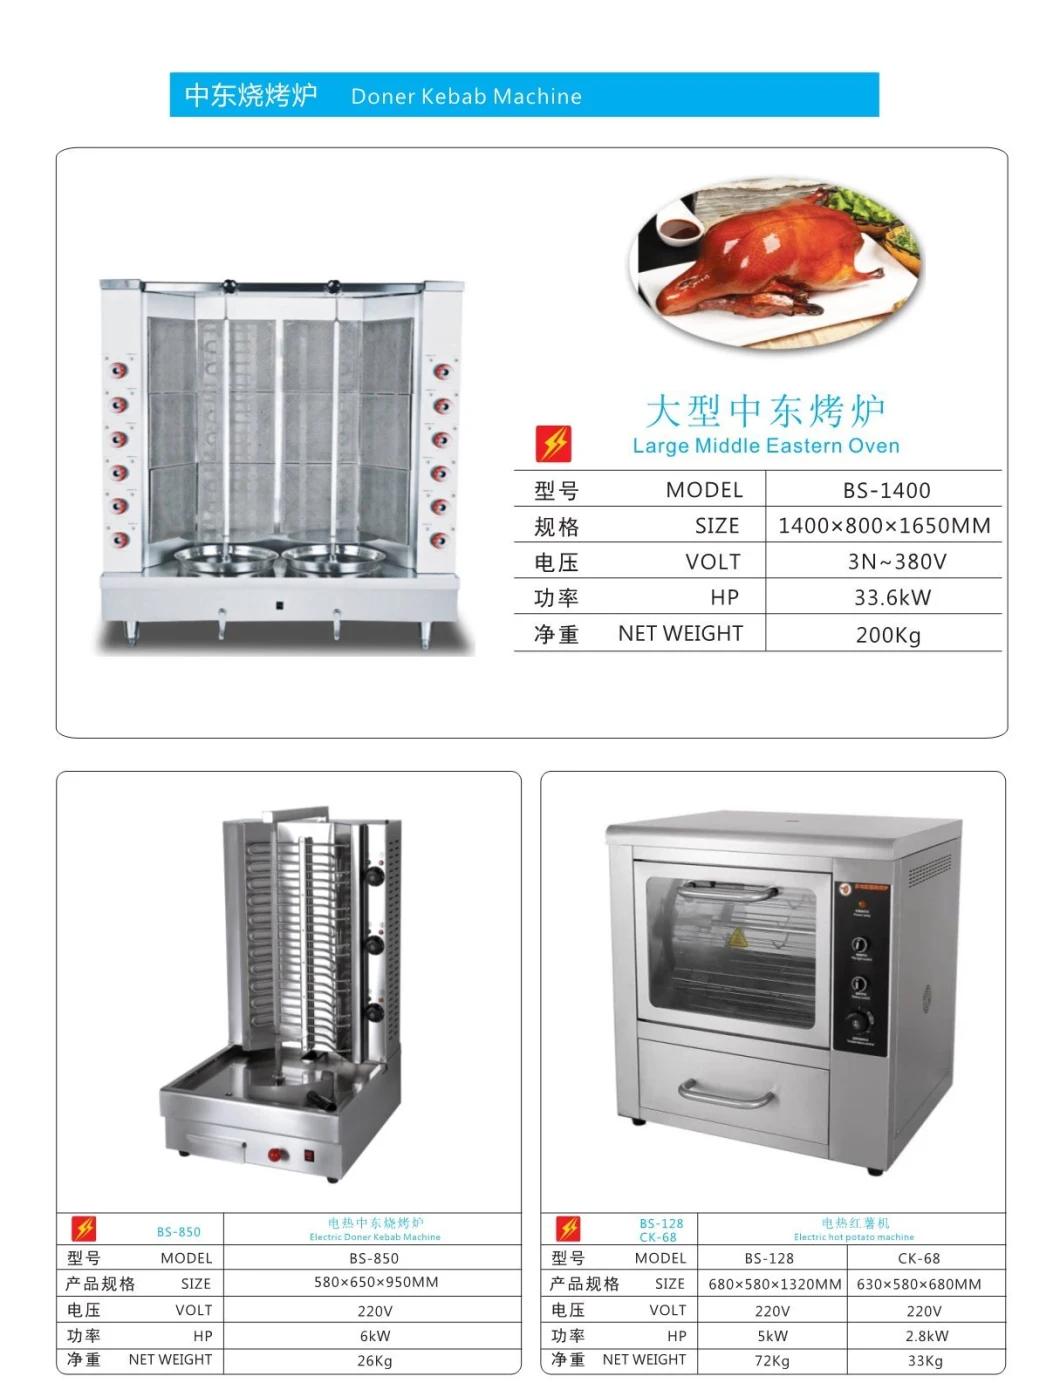 Factory Commercial Baking Kebab Machine Mini Doner Chicken Shawarma Grill Cutting Maker Machine Electric